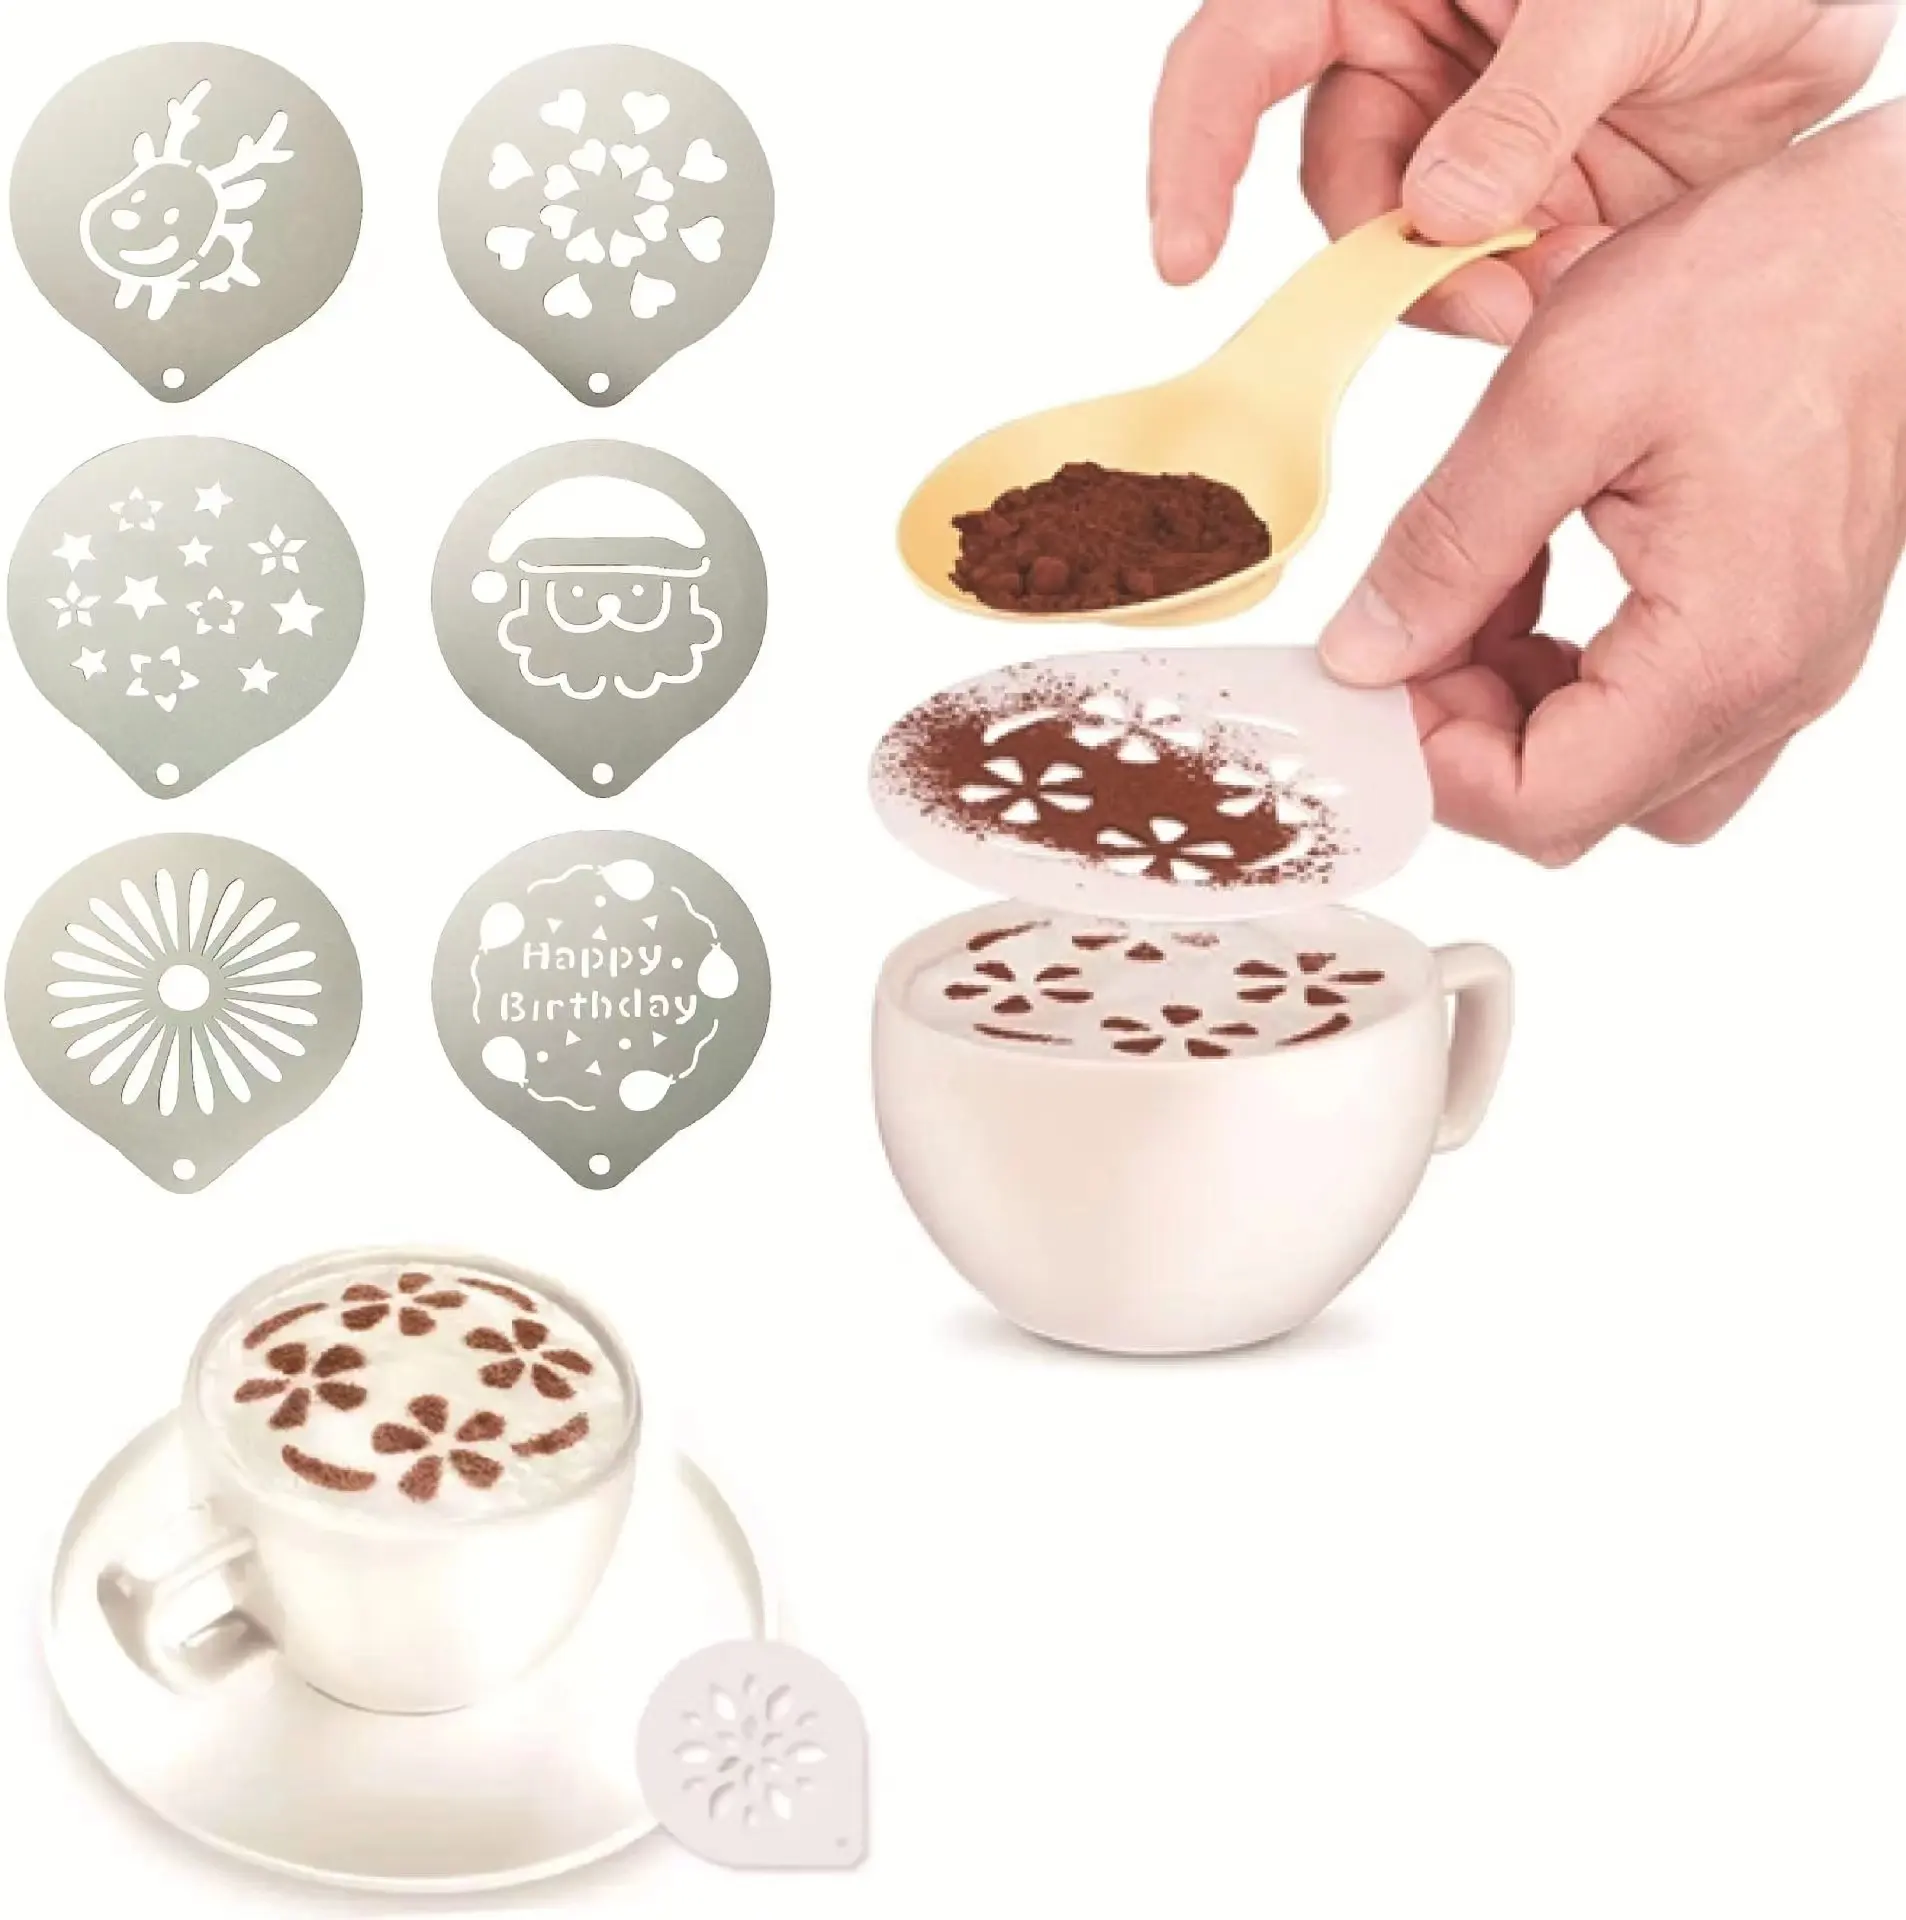 Wholesale Oatmeal Cappuccino Hot Chocolate Stainless Steel Barista Coffee Decorating Stencils Latte Art Stencil Coffee